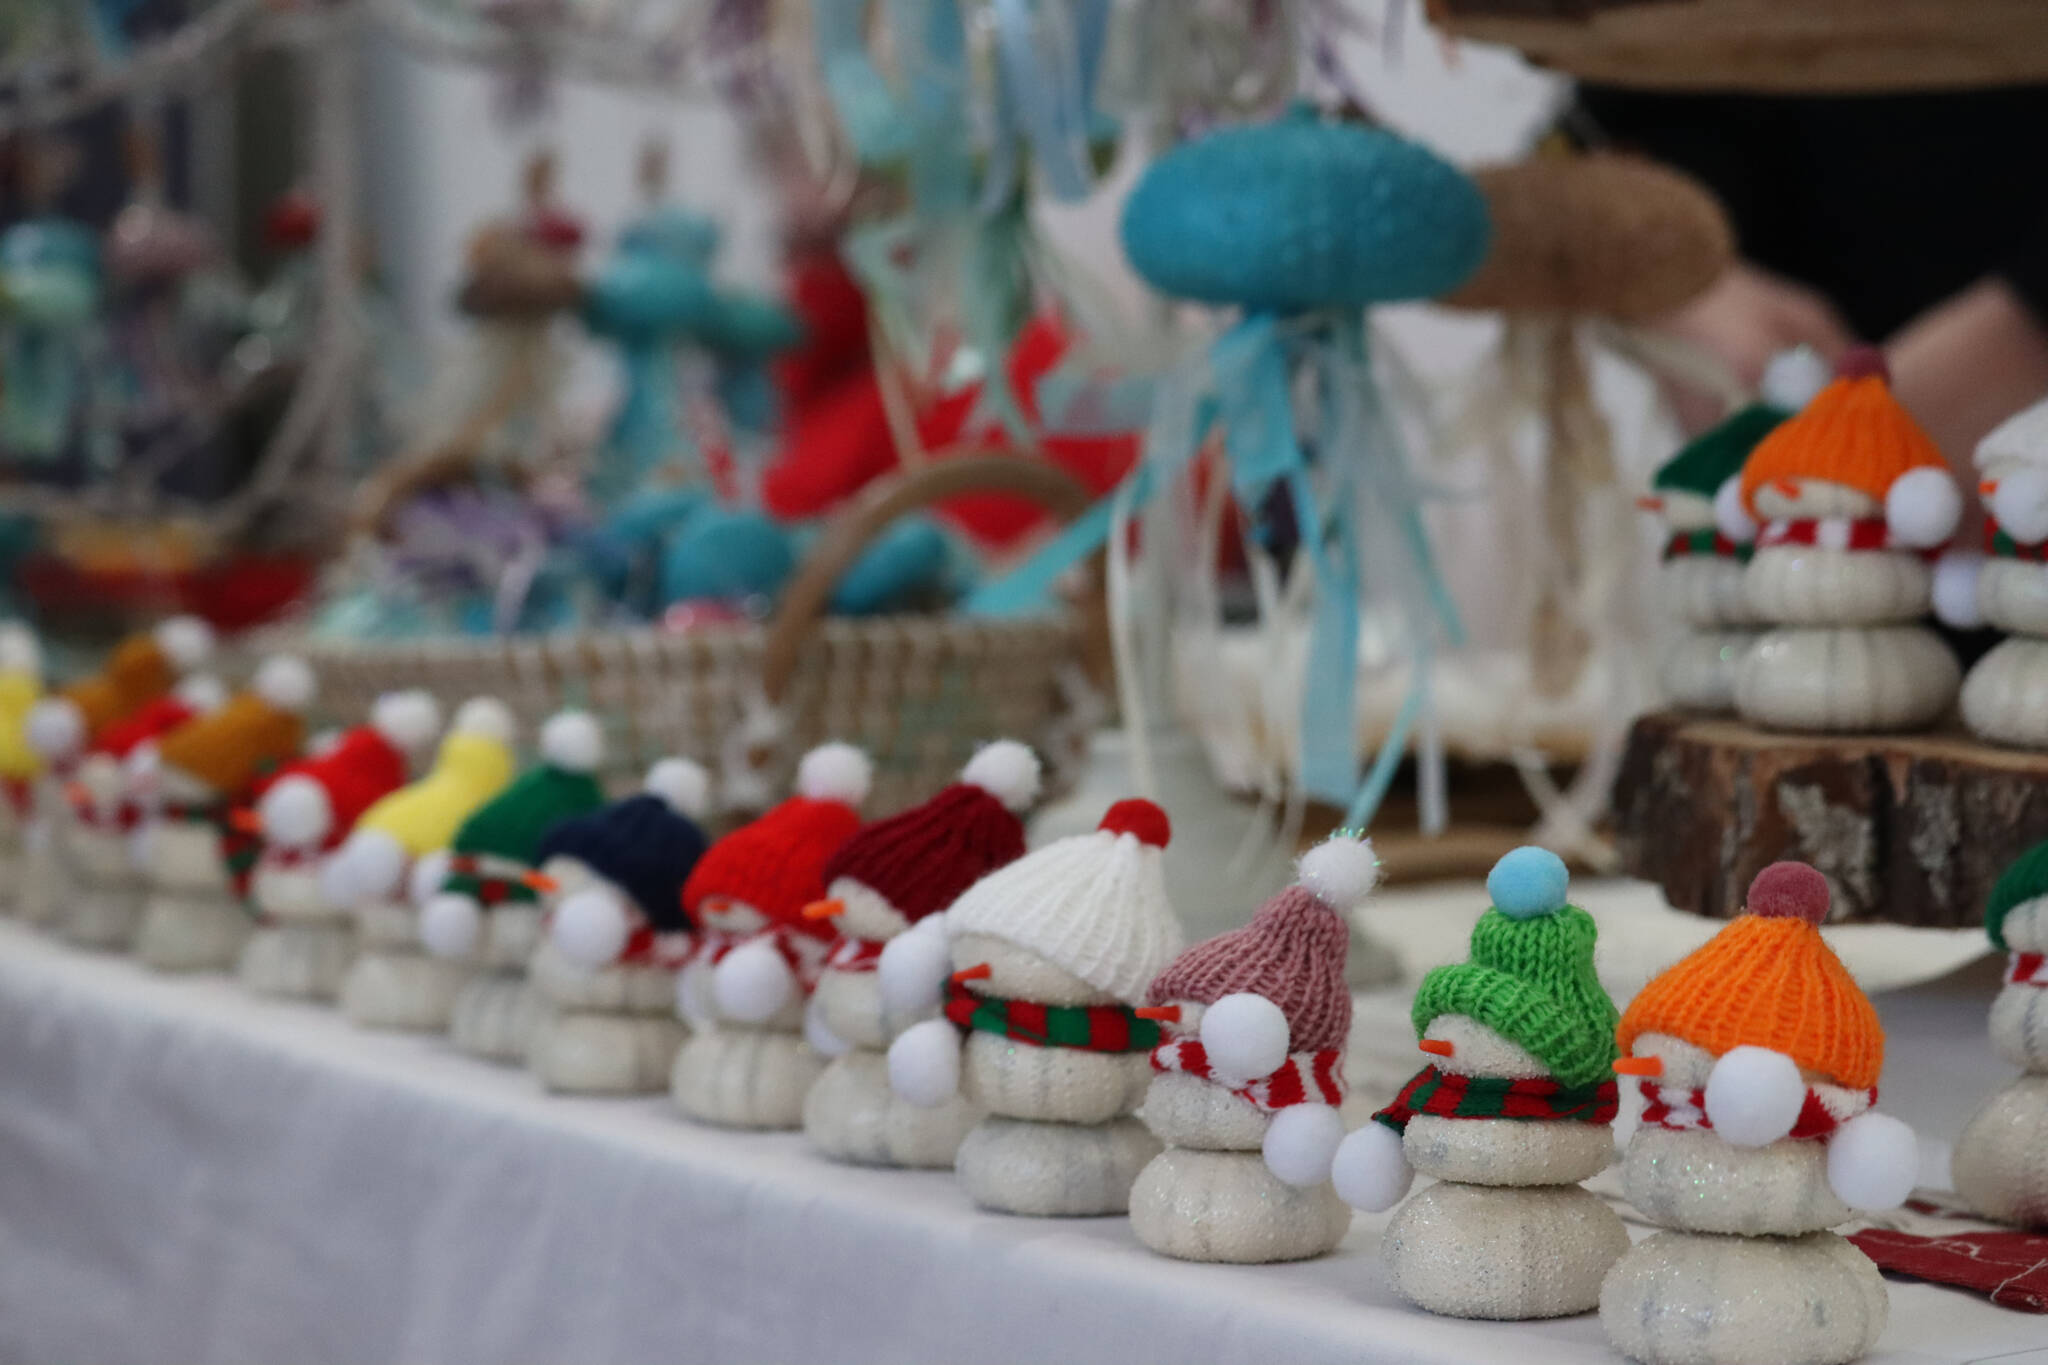 Margaret Mimnaugh with Tidal Creations from Ketchikan sets up her seasonal creations made with found hand painted sea urchin shells, along with snowmen and jelly fish at this year’s Stocking Stuffer Showcase on Saturday at the Juneau Arts and Culture Center. (Jonson Kuhn / Juneau Empire)